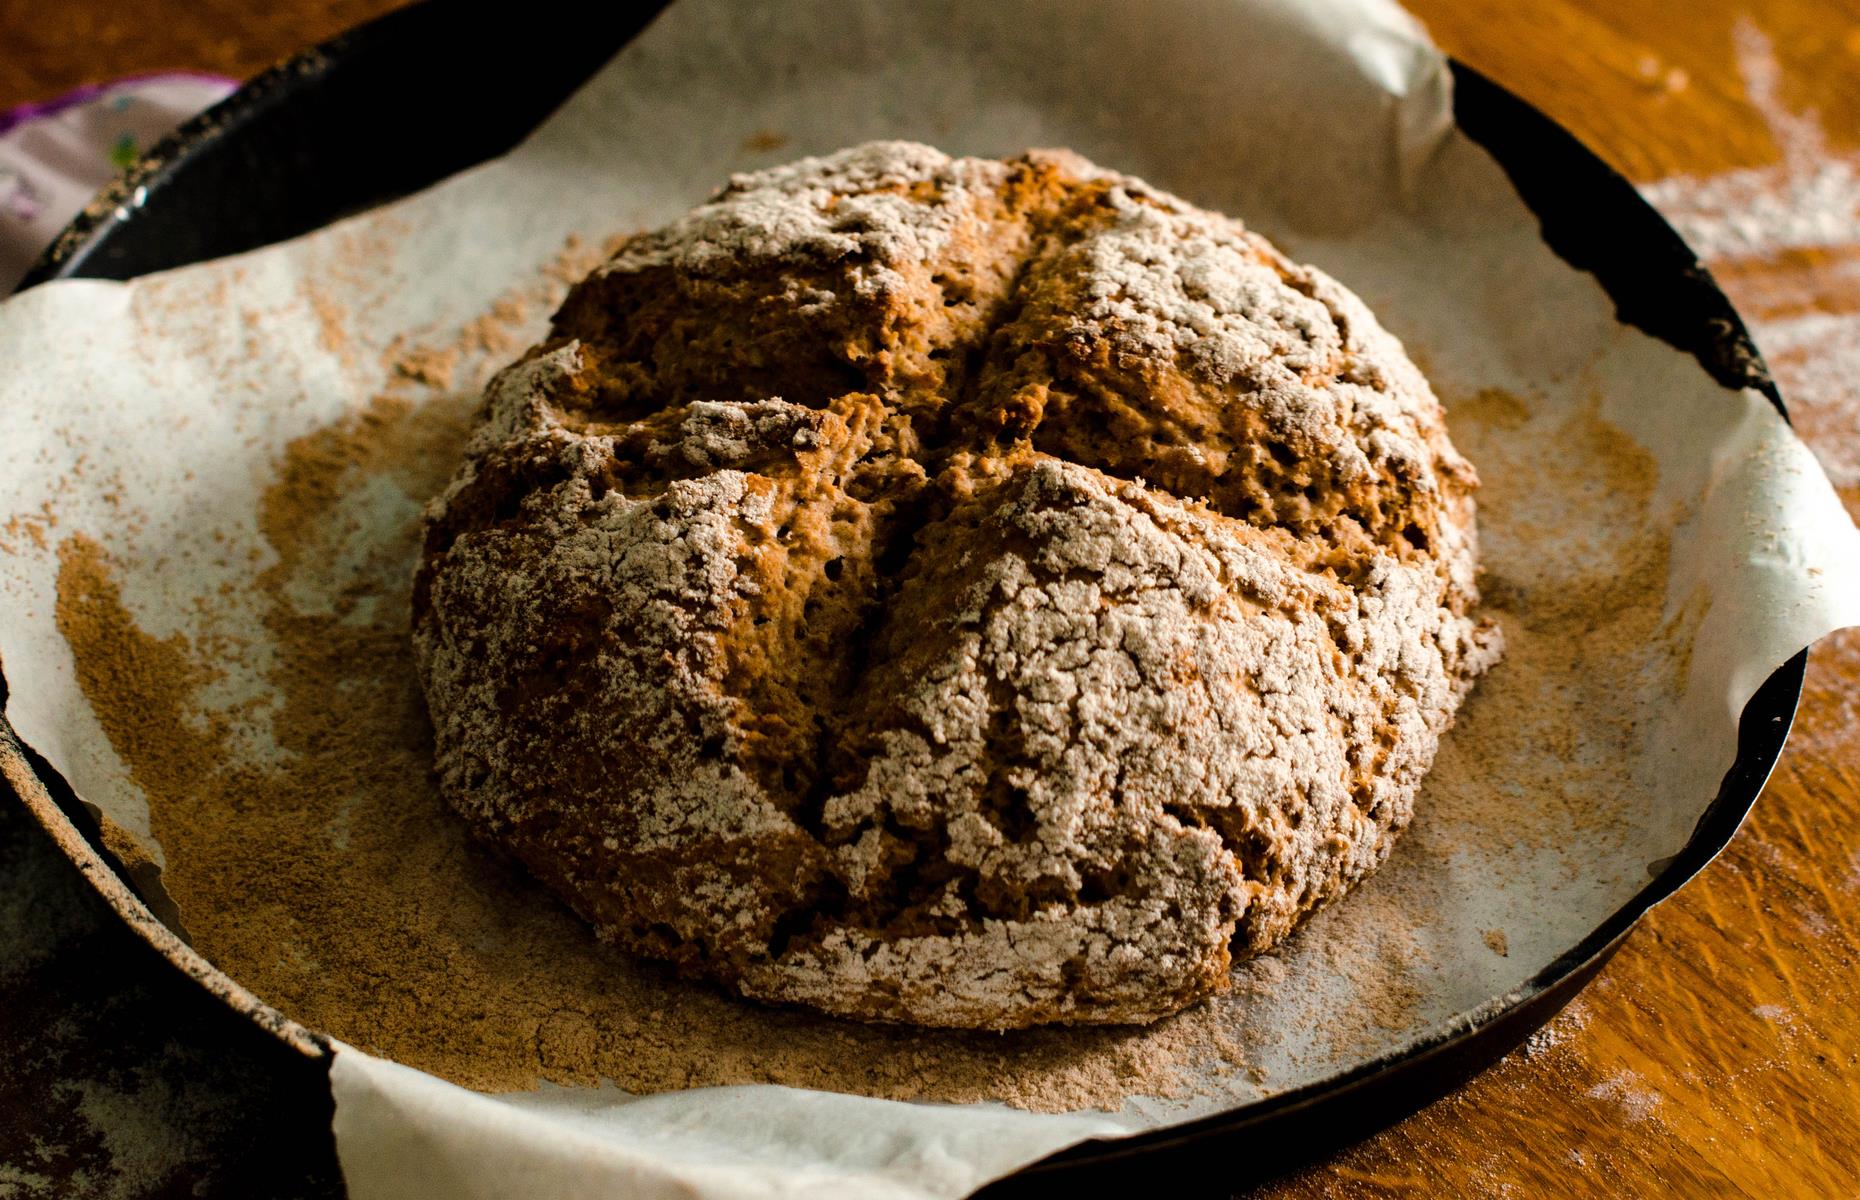 <p>Soda bread is the easiest bread to make, so this is a great starting point if you're a beginner. It doesn't contain yeast, so there's no rising to wait for and no kneading required – in fact, to prevent it from becoming tough, the less you handle the dough, the better. Follow our recipe and, in just 40 minutes, you'll have a freshly baked loaf on the table. Soda bread should really be eaten on the day it’s made. Alternatively, slice, pop in the freezer, and toast from frozen.</p>  <p><a href="https://www.lovefood.com/recipes/94106/irish-soda-bread-recipe"><strong>Get the recipe for soda bread here</strong></a></p>